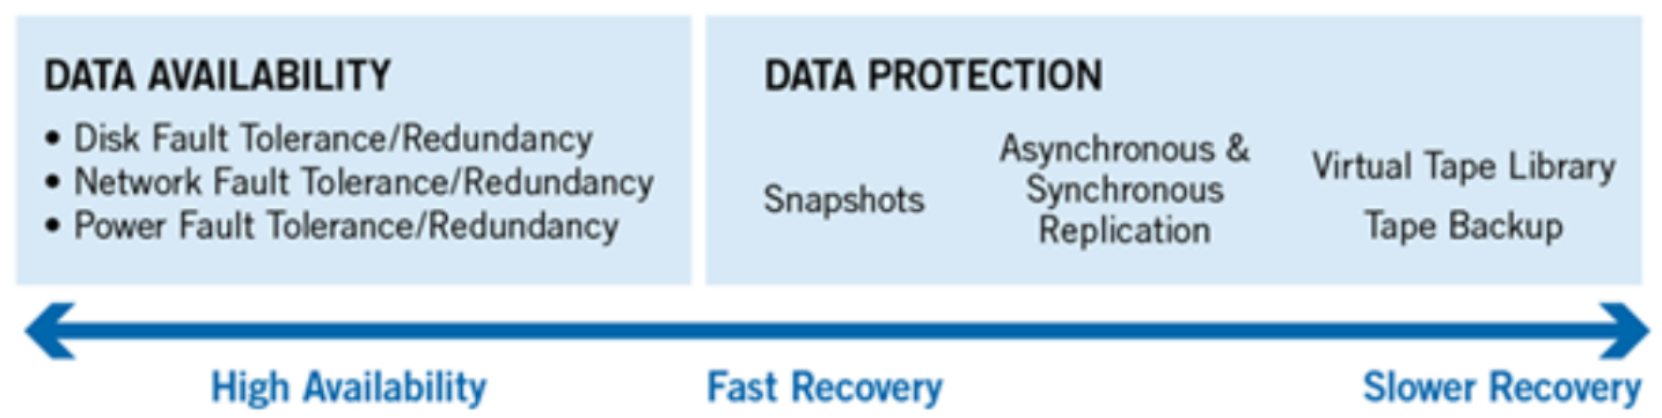 Data protection continuum for high availability and recovery type.